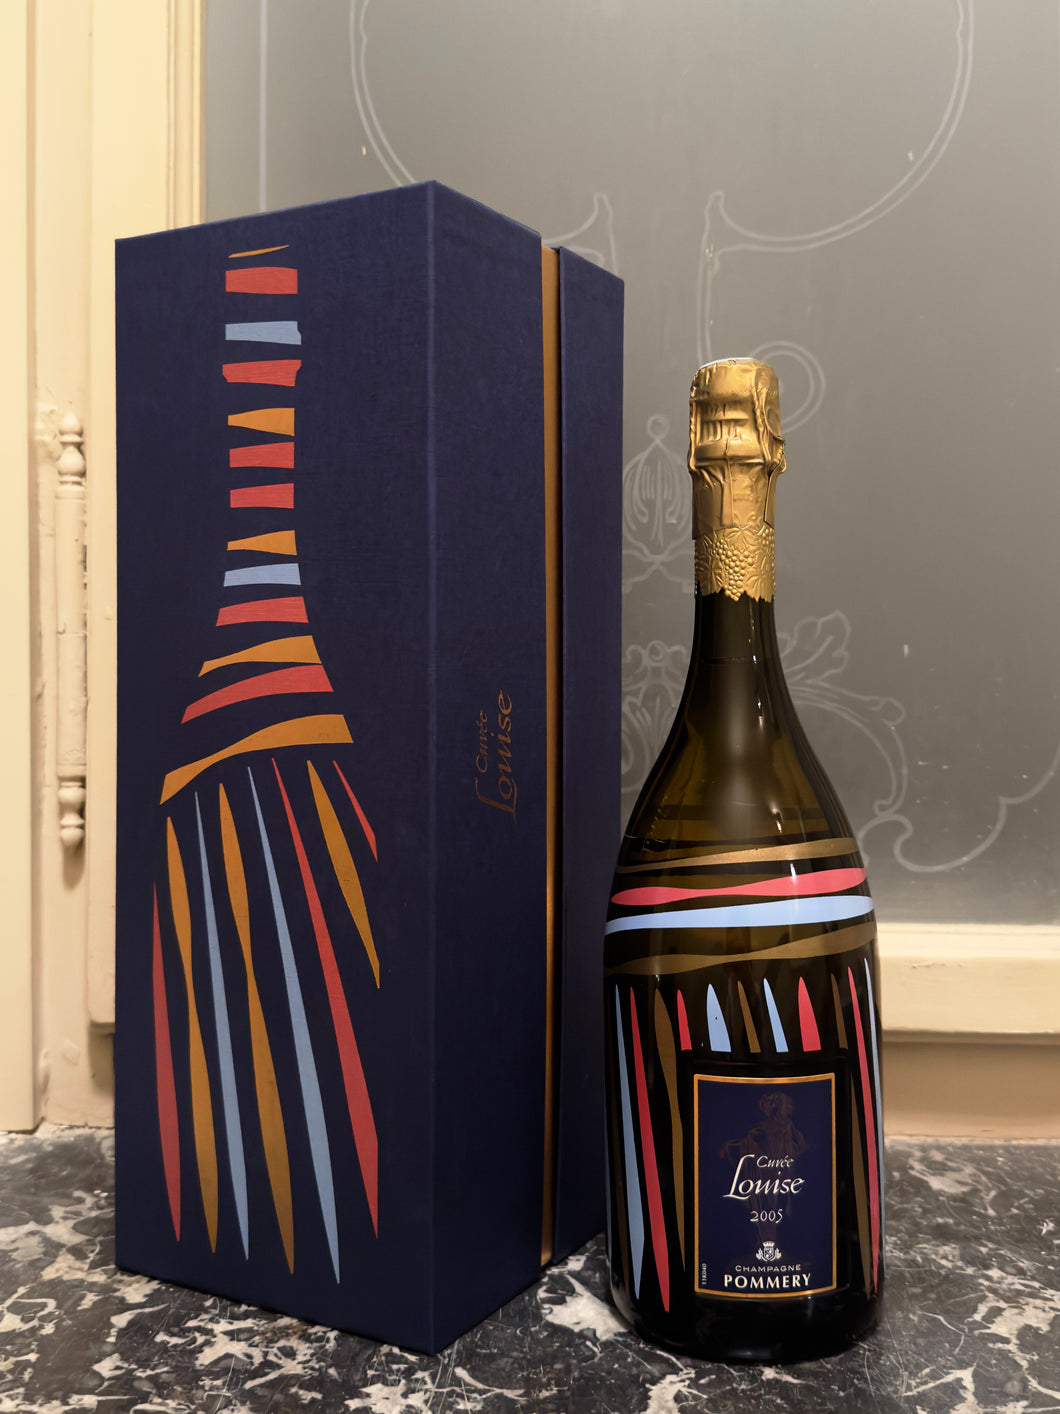 CHAMPAGNE POMMERY CUVÉE LOUISE BRUT 2005 75 cL GIFT BOX